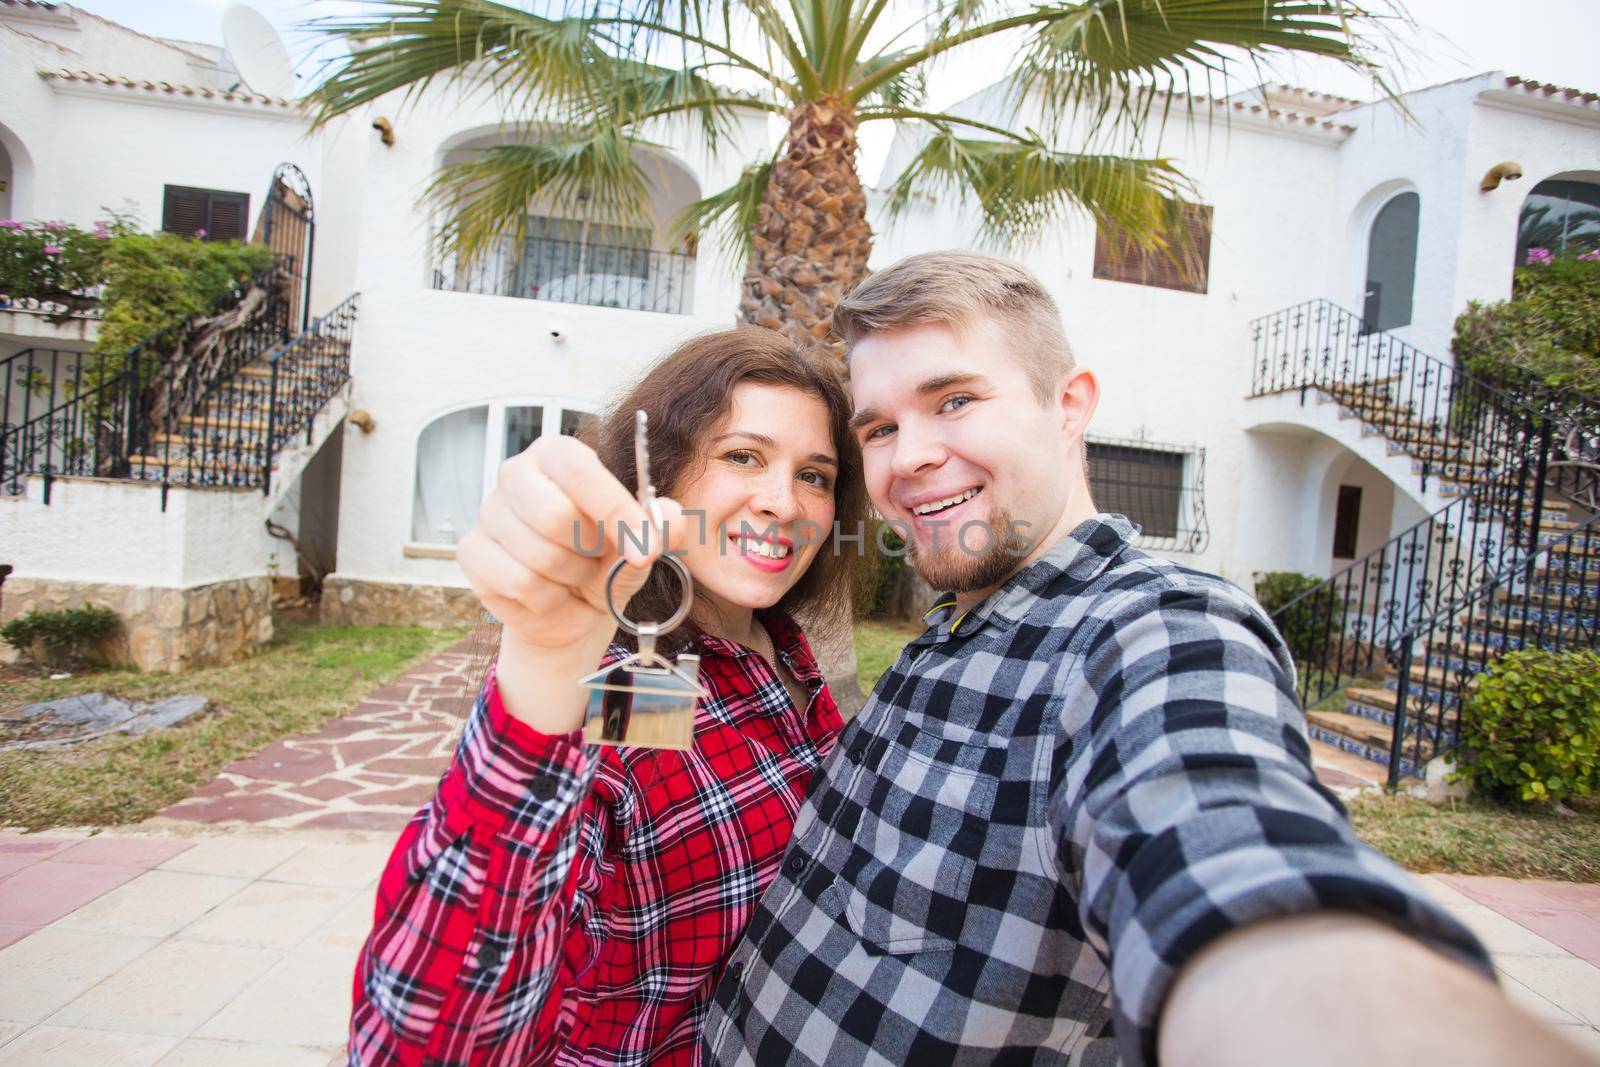 Moving and real estate concept - Happy young laughing cheerful couple man and woman holding their new home keys in front of a house. by Satura86